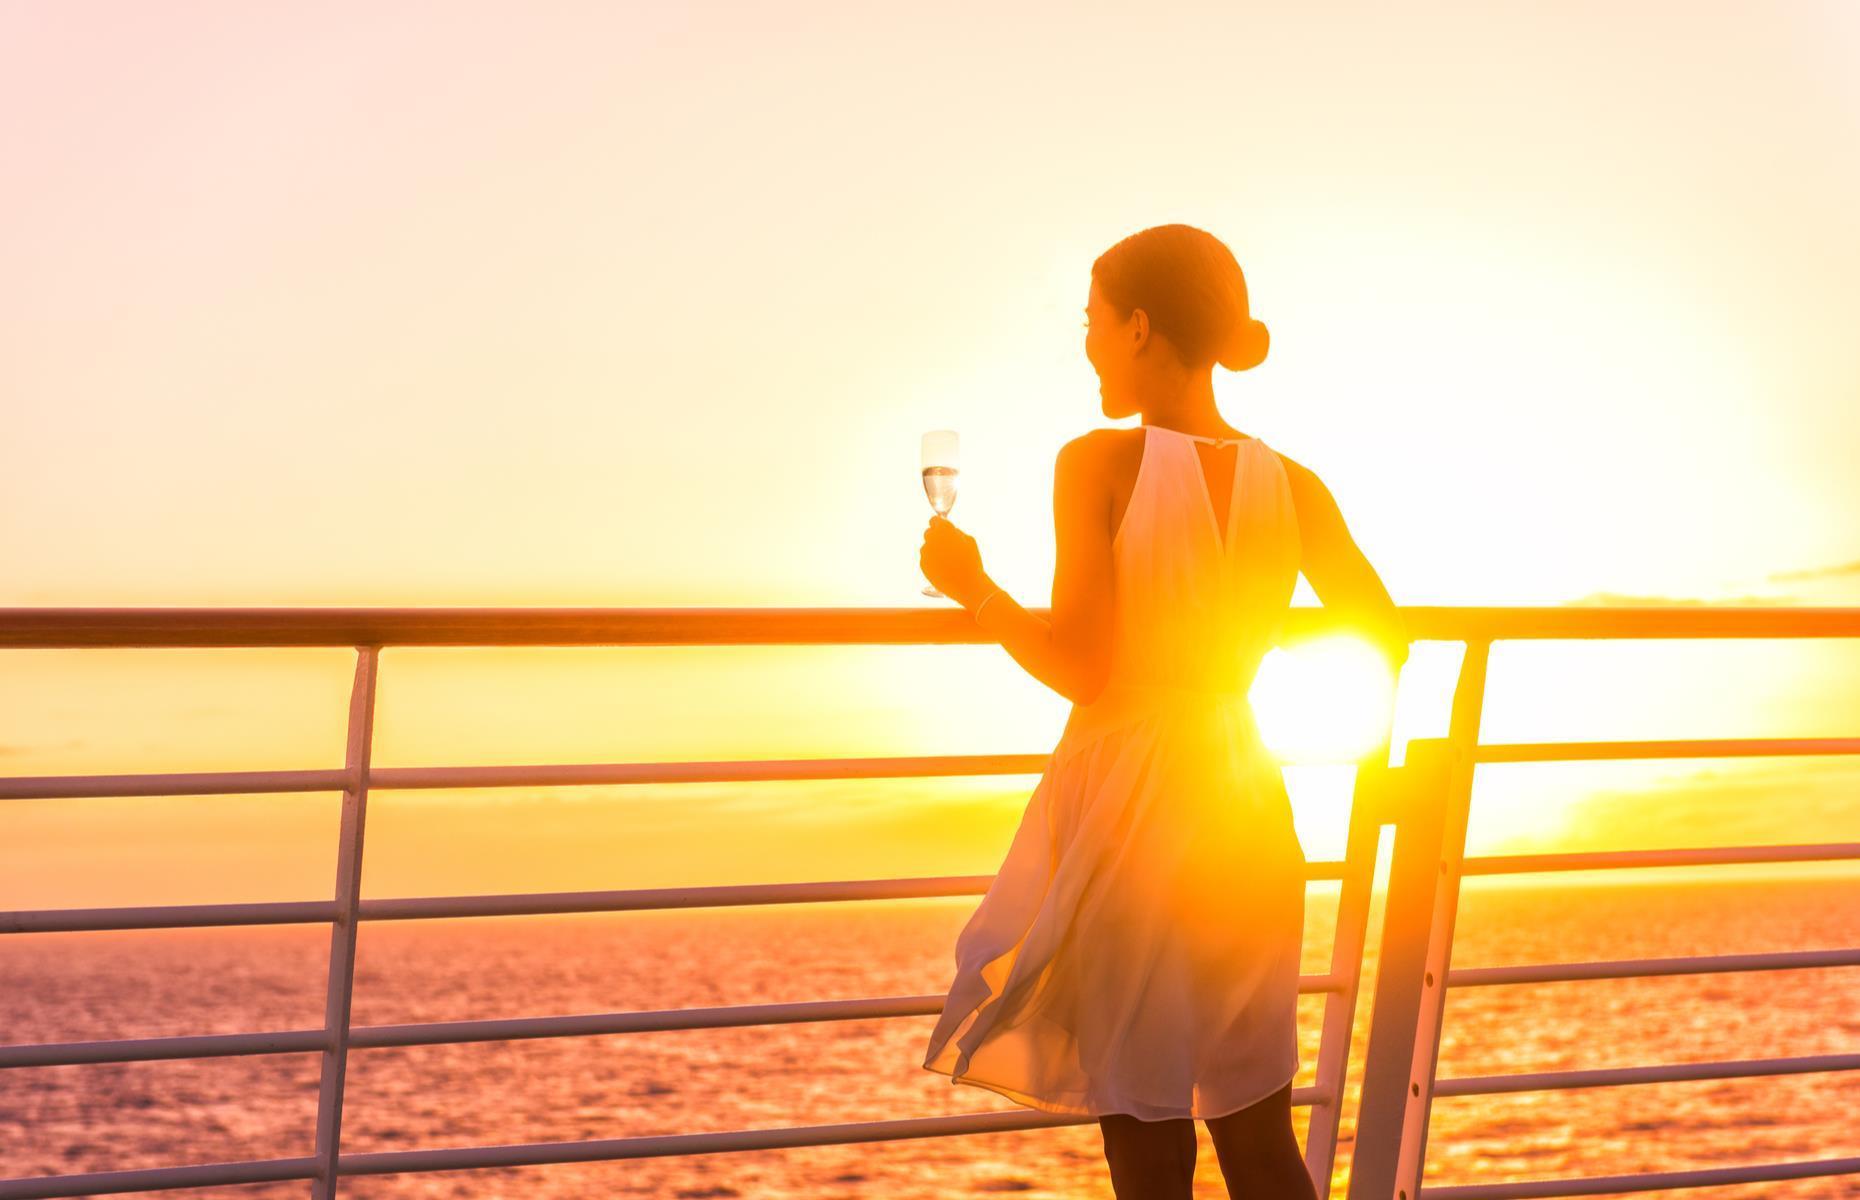 <p>Before you choose your cruise or splash out on added extras, always check what’s included as standard – you’ll often get a pleasant surprise. For example, Silversea offers one hour of free internet a day in some cabin categories, while numerous cruise lines (Viking, for one) include excursions in the base fare.</p>